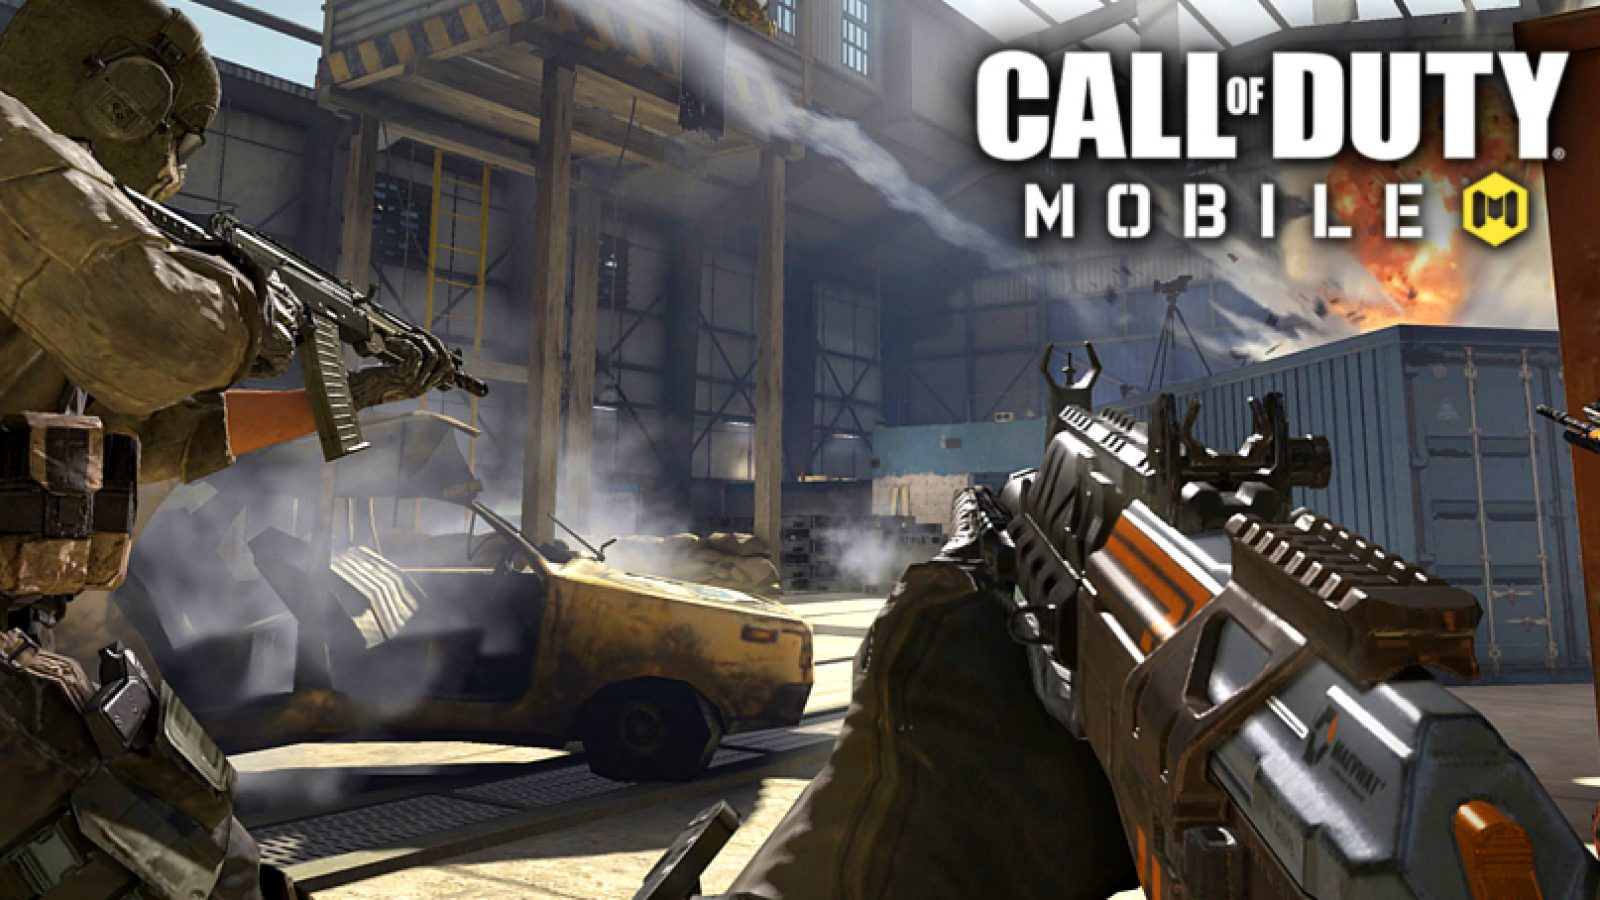 Call of duty 3 mobile. Call of Duty мобайл. Call of Duty 4 mobile. Call of Duty mobile 2020. Call of Duty mobile Battle Royale.